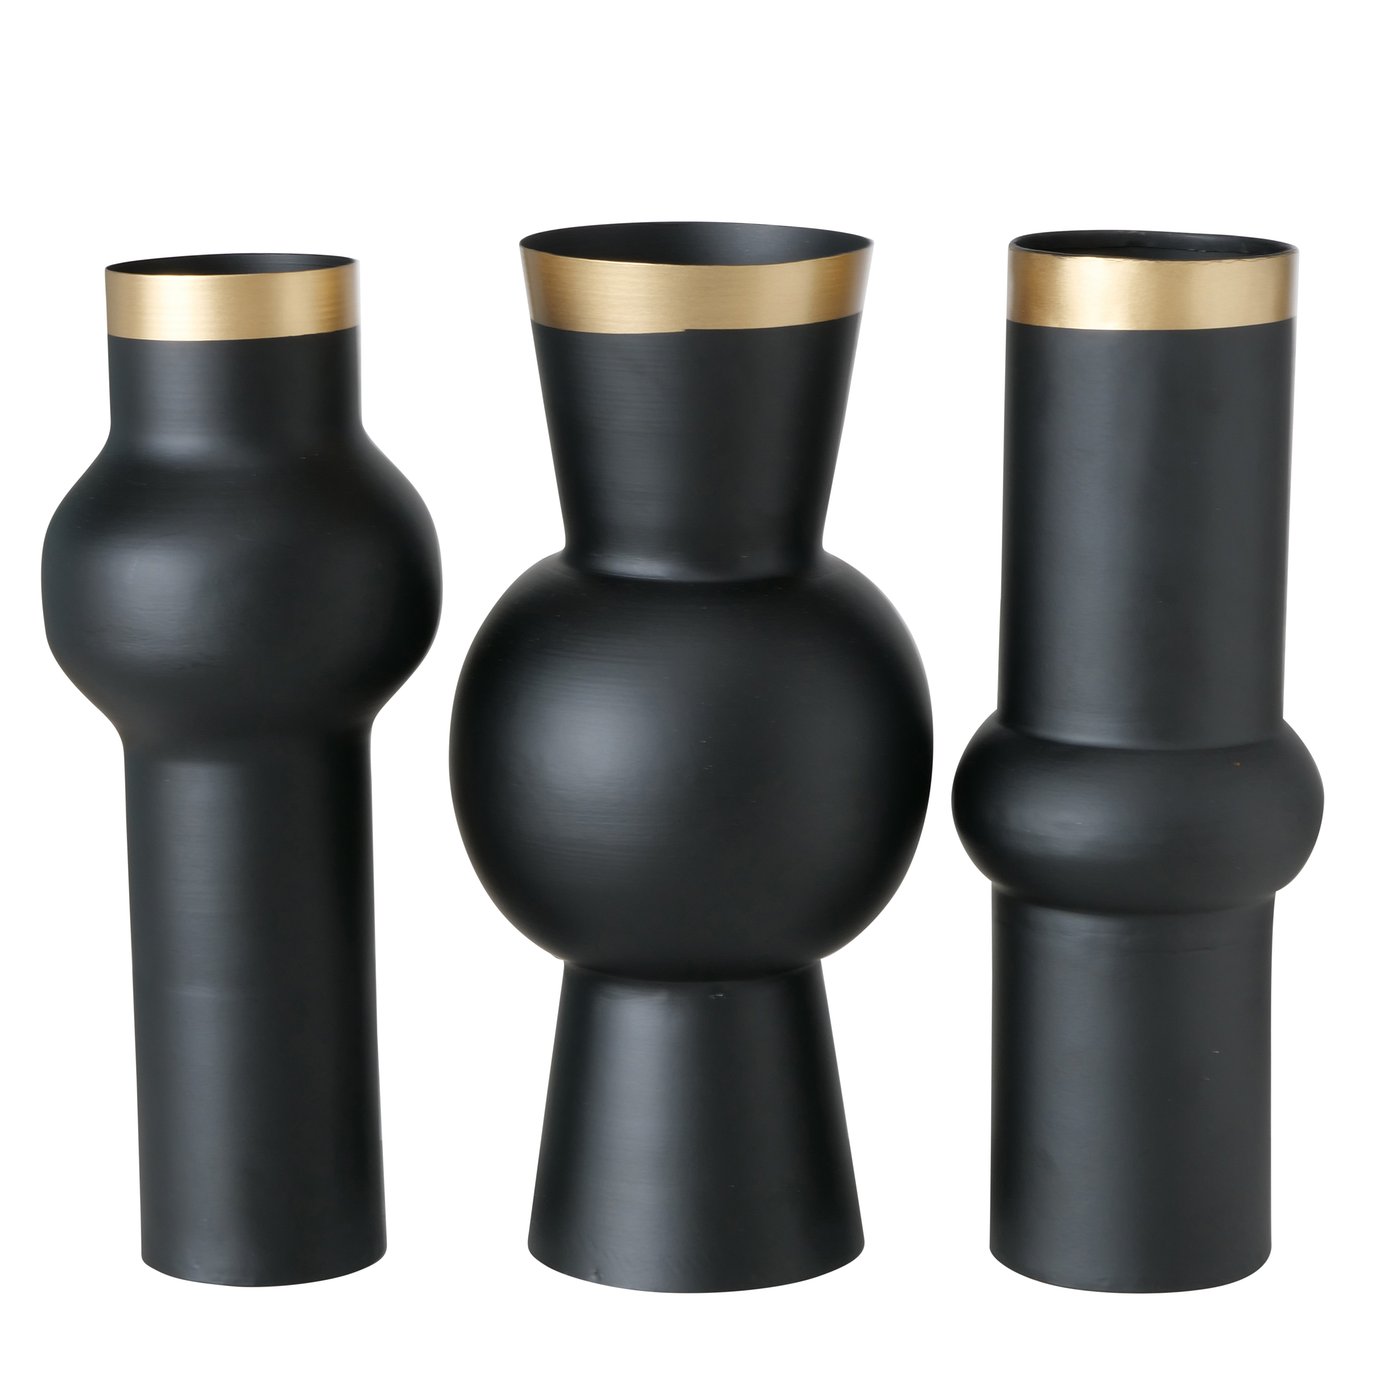 &Quirky Black & Gold Metal Decorative Vase 3 Styles